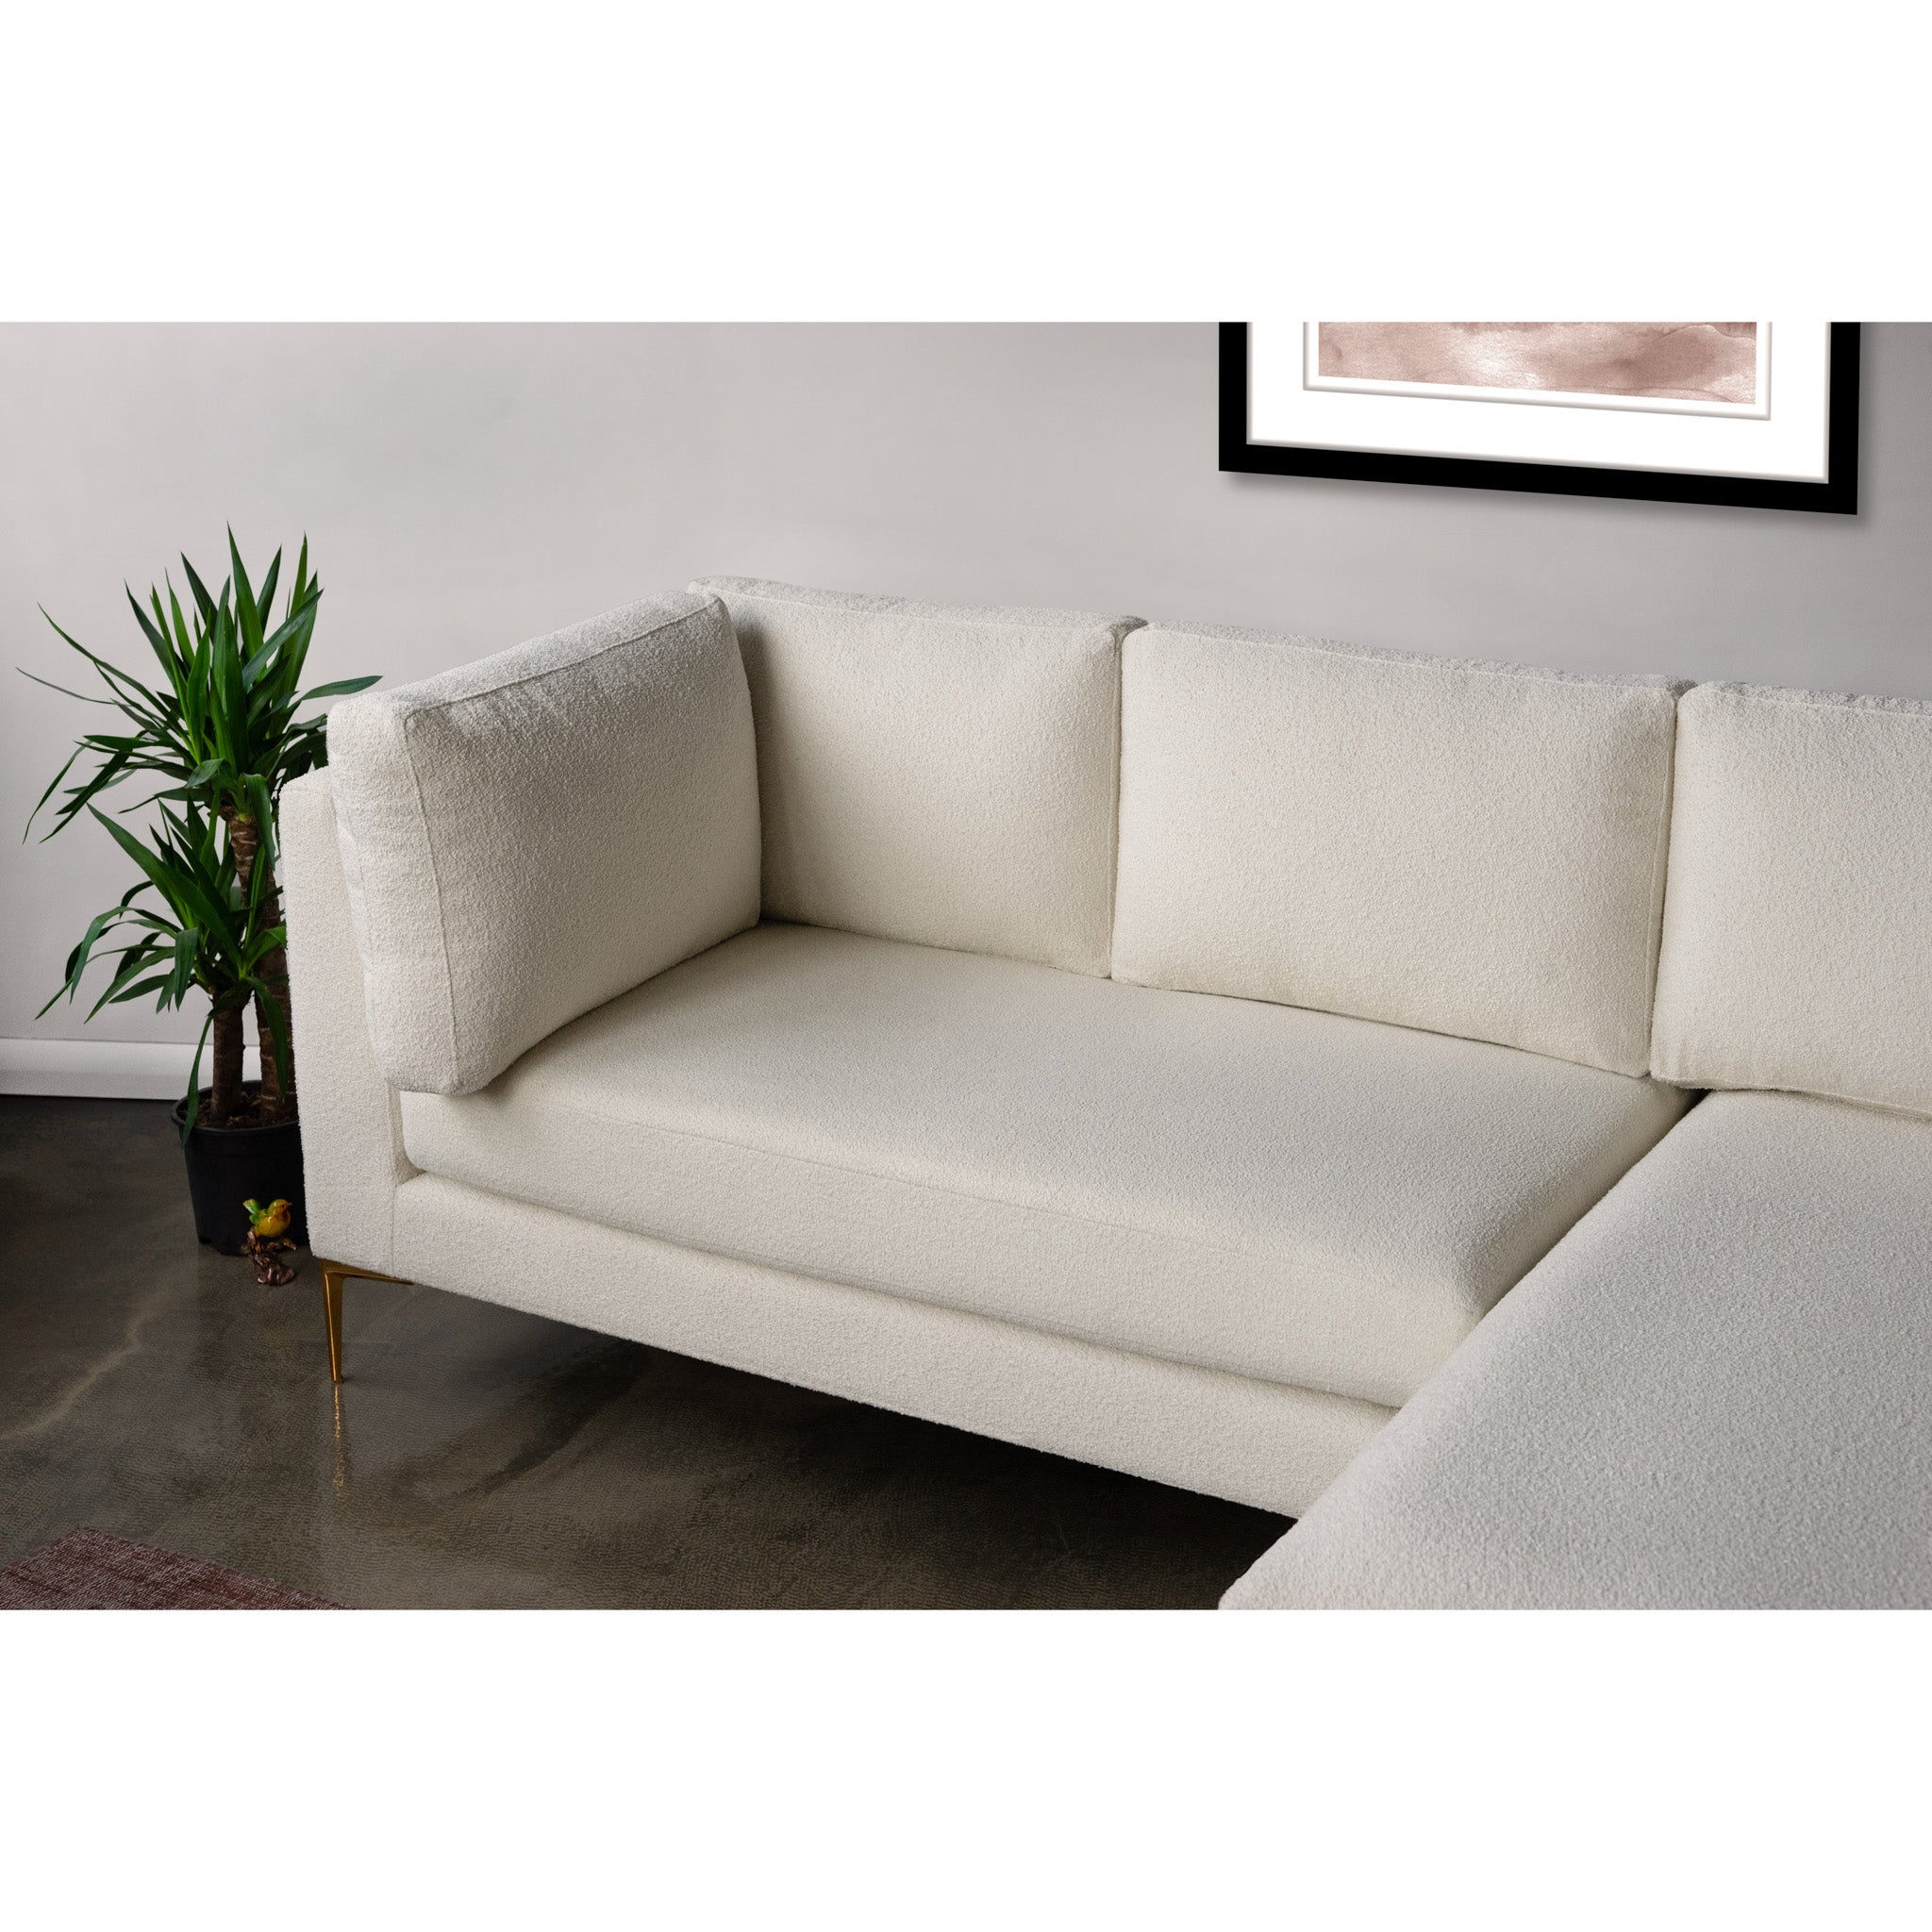 Chamberlain Right Facing Chaise Sectional Sofa (Beige Boucle)